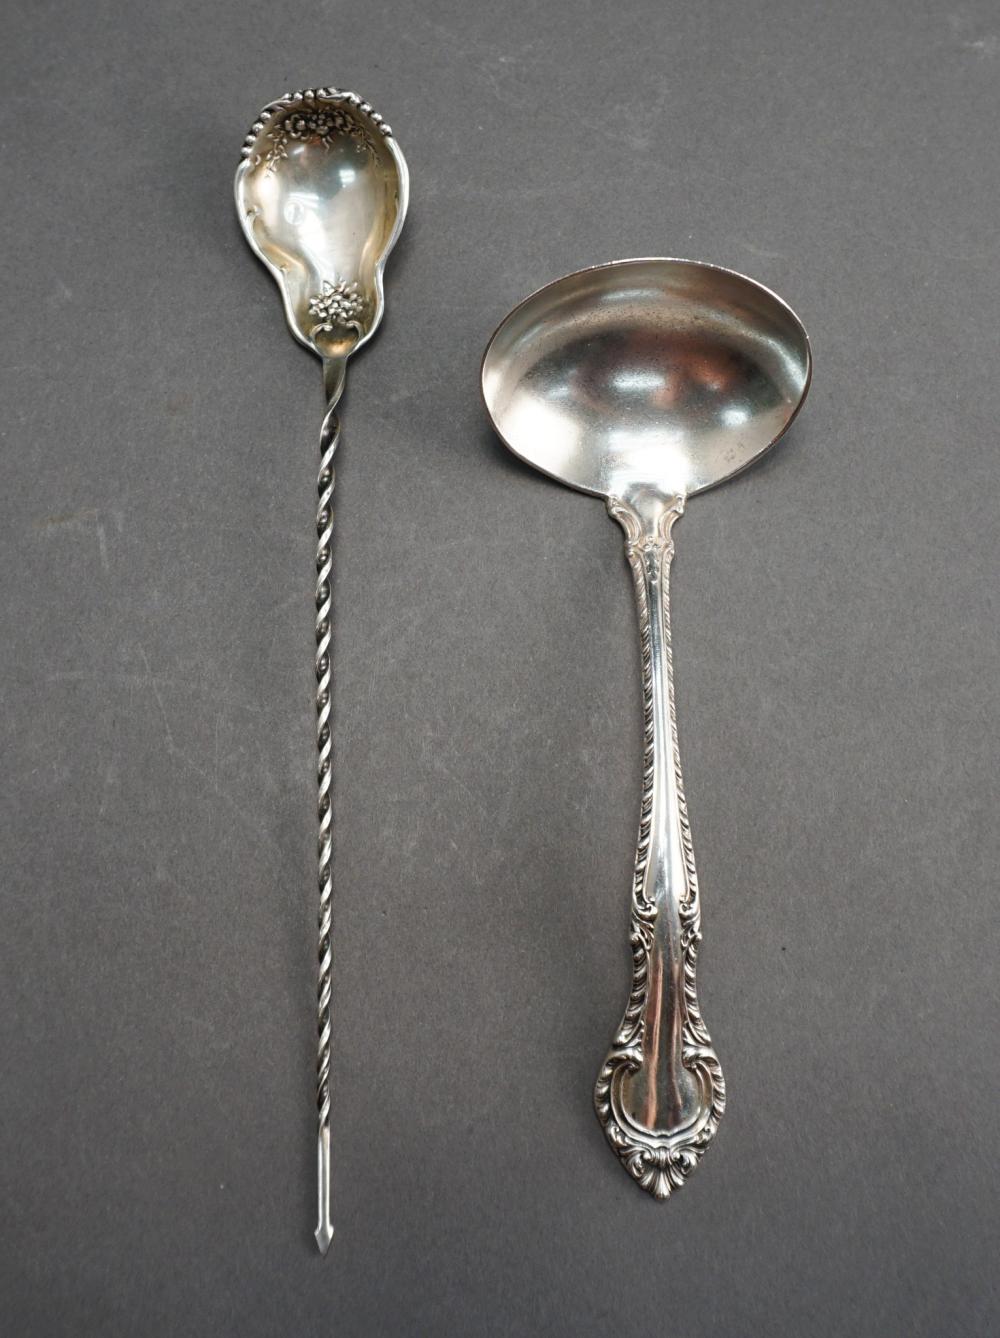 AMERICAN STERLING SILVER LADLE 32a5b3